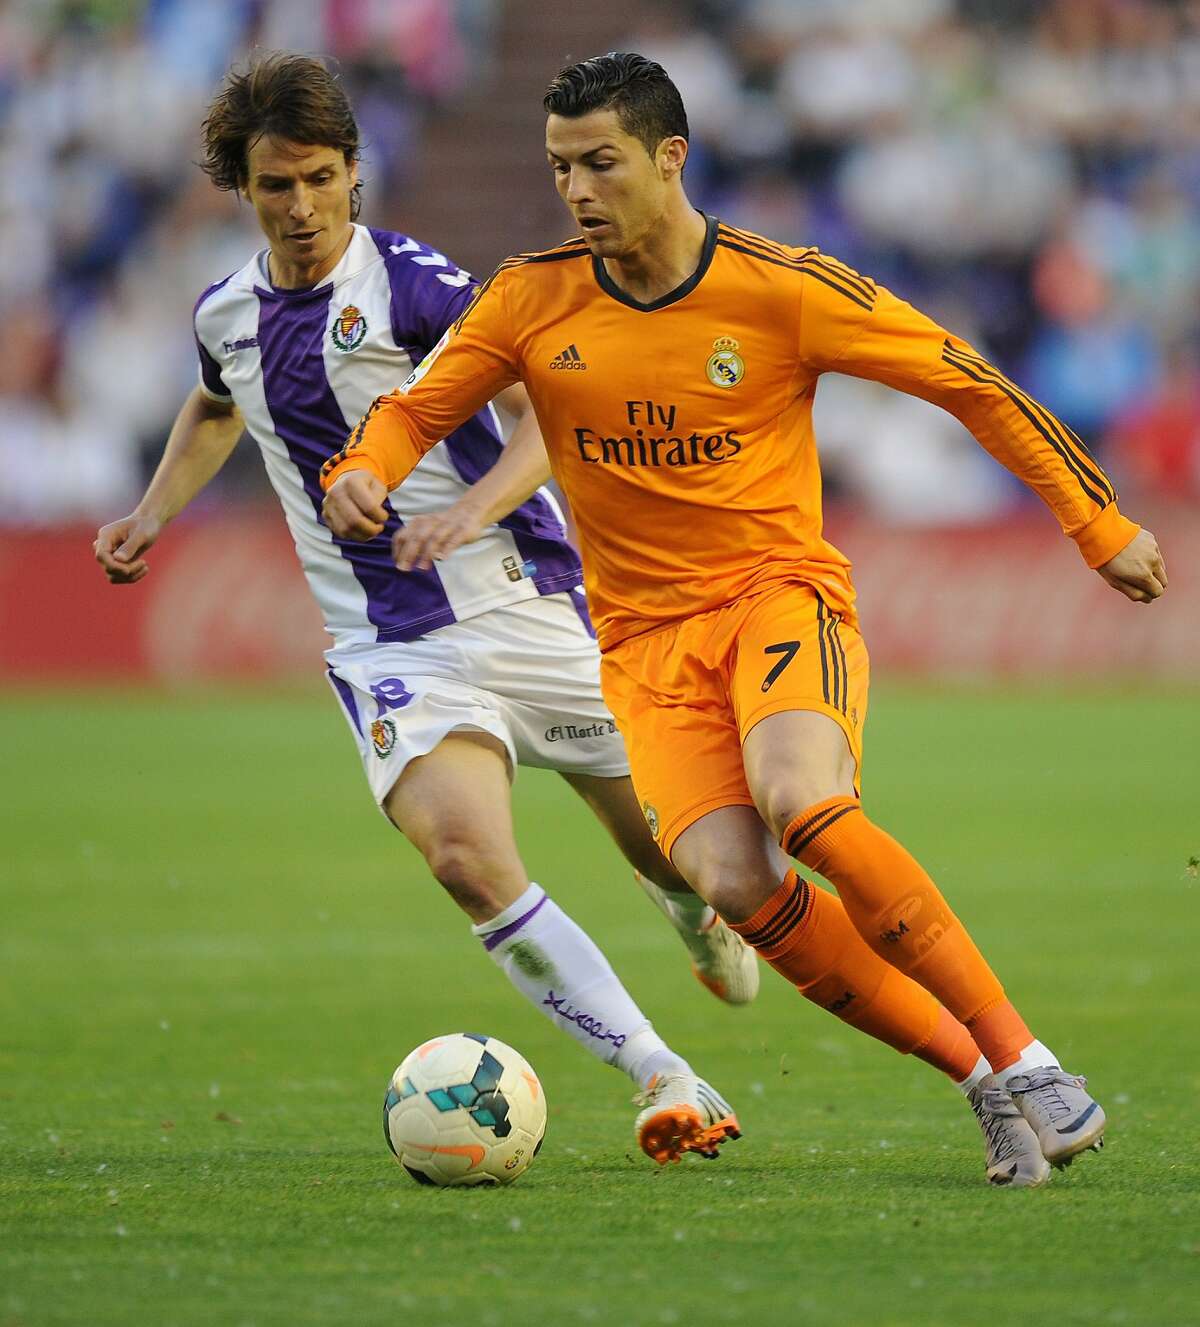 Real Madrid's Portuguese forward Cristiano Ronaldo, right, vies for the ball with Valladolid's Diego Marino, during a Spanish La Liga soccer match at the Jose Zorrilla stadium in Valladolid, Spain, Wednesday, May 7, 2014. (AP Photo/Israel L. Murillo)